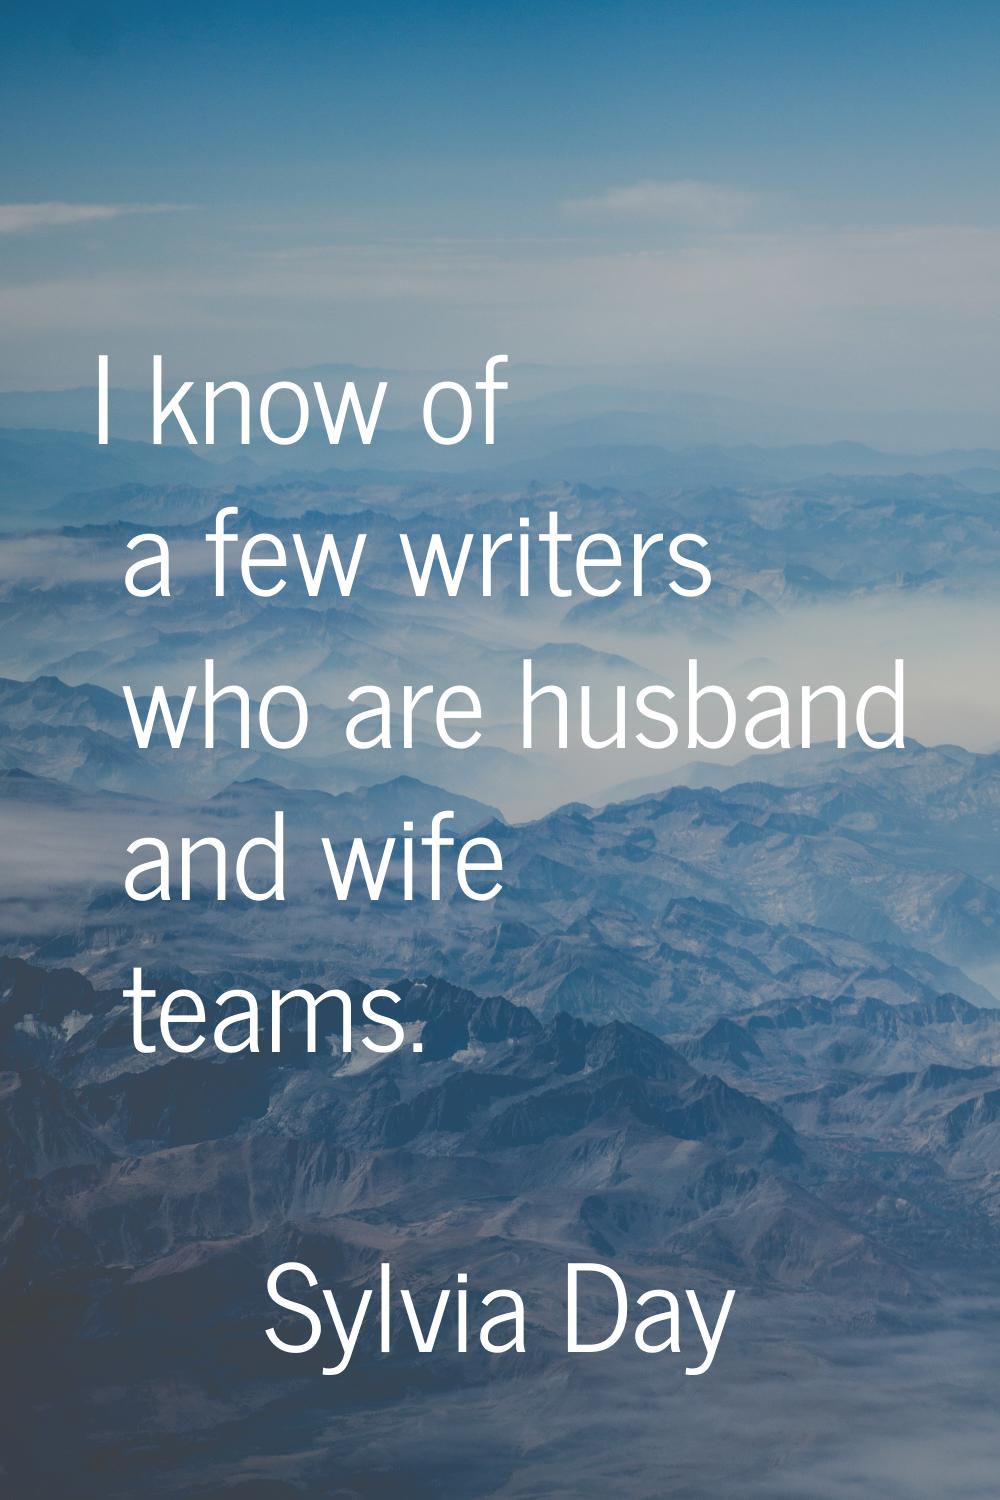 I know of a few writers who are husband and wife teams.